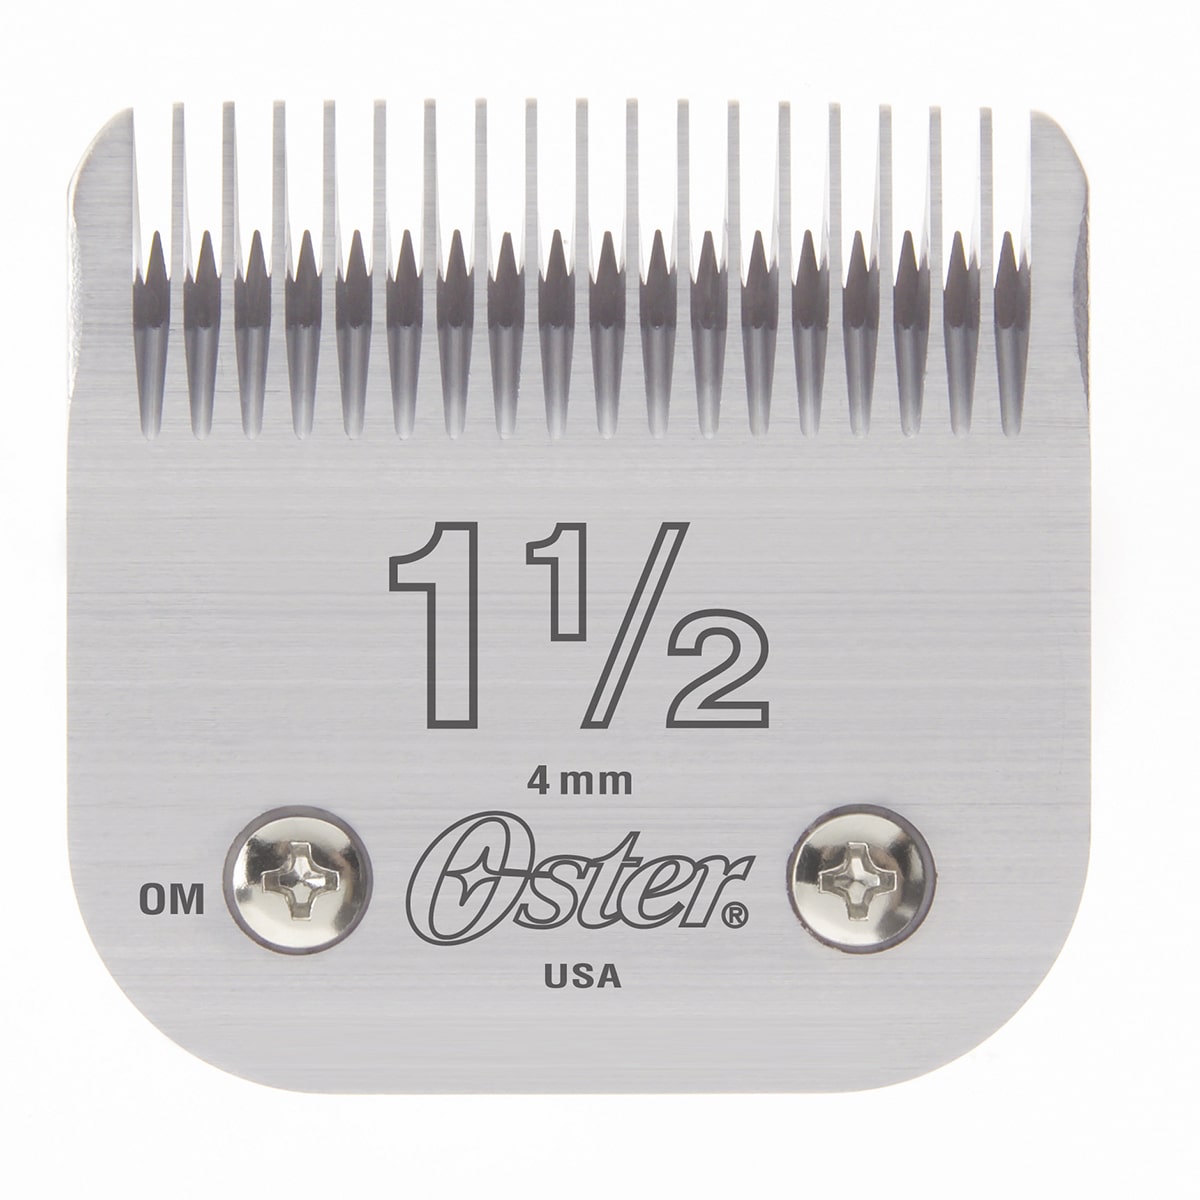 Oster Professional Detachable Clipper Replacement Blade, Size #1 1/2